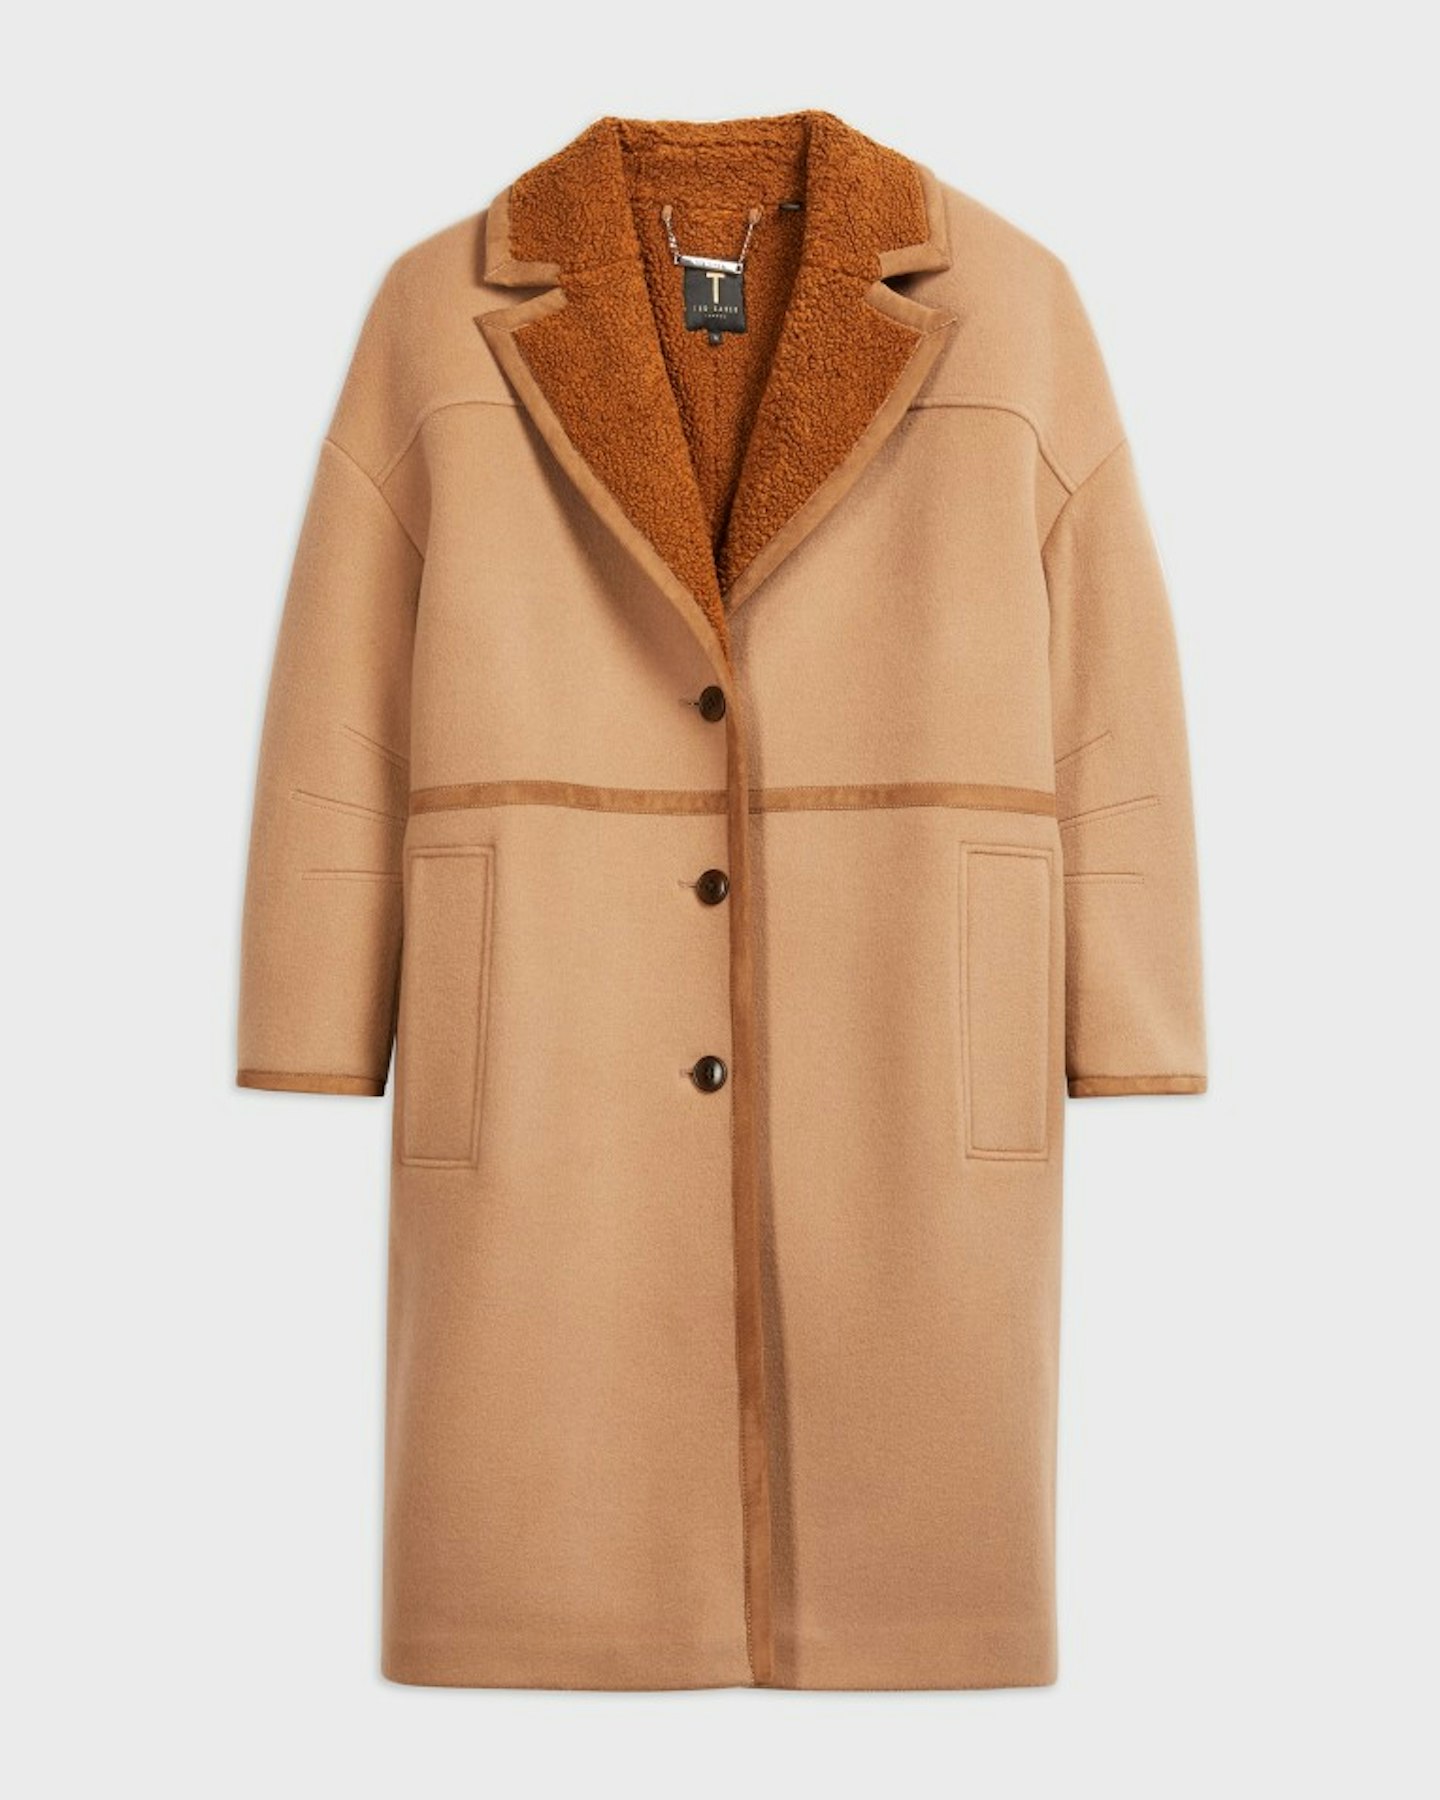 Ted Baker, Oversized wool cocoon coat, WAS £425 NOW £255